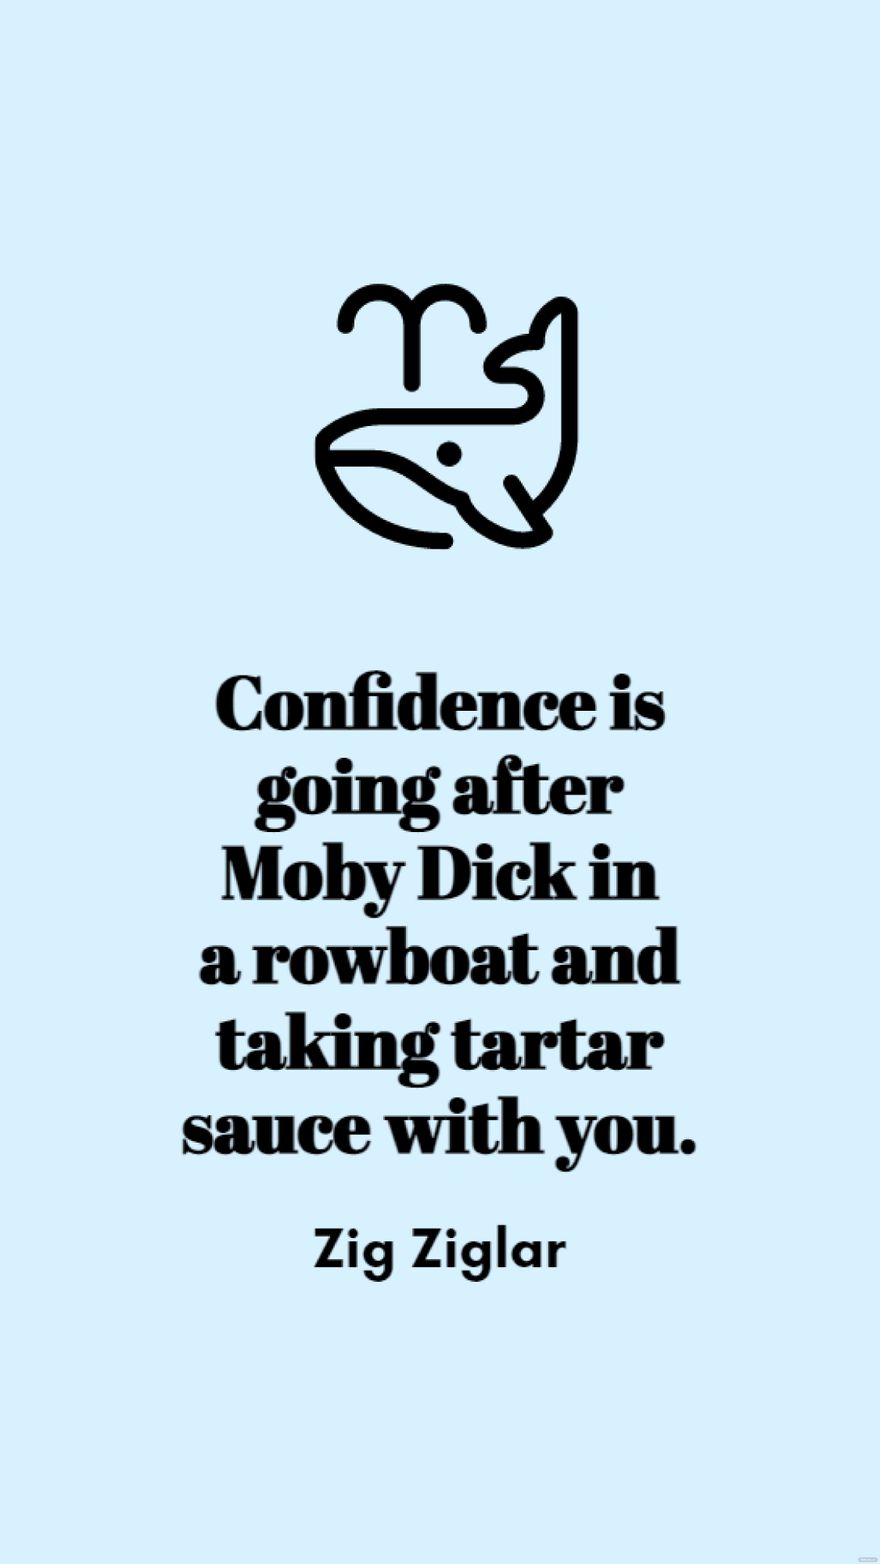 Zig Ziglar - Confidence is going after Moby Dick in a rowboat and taking tartar sauce with you.